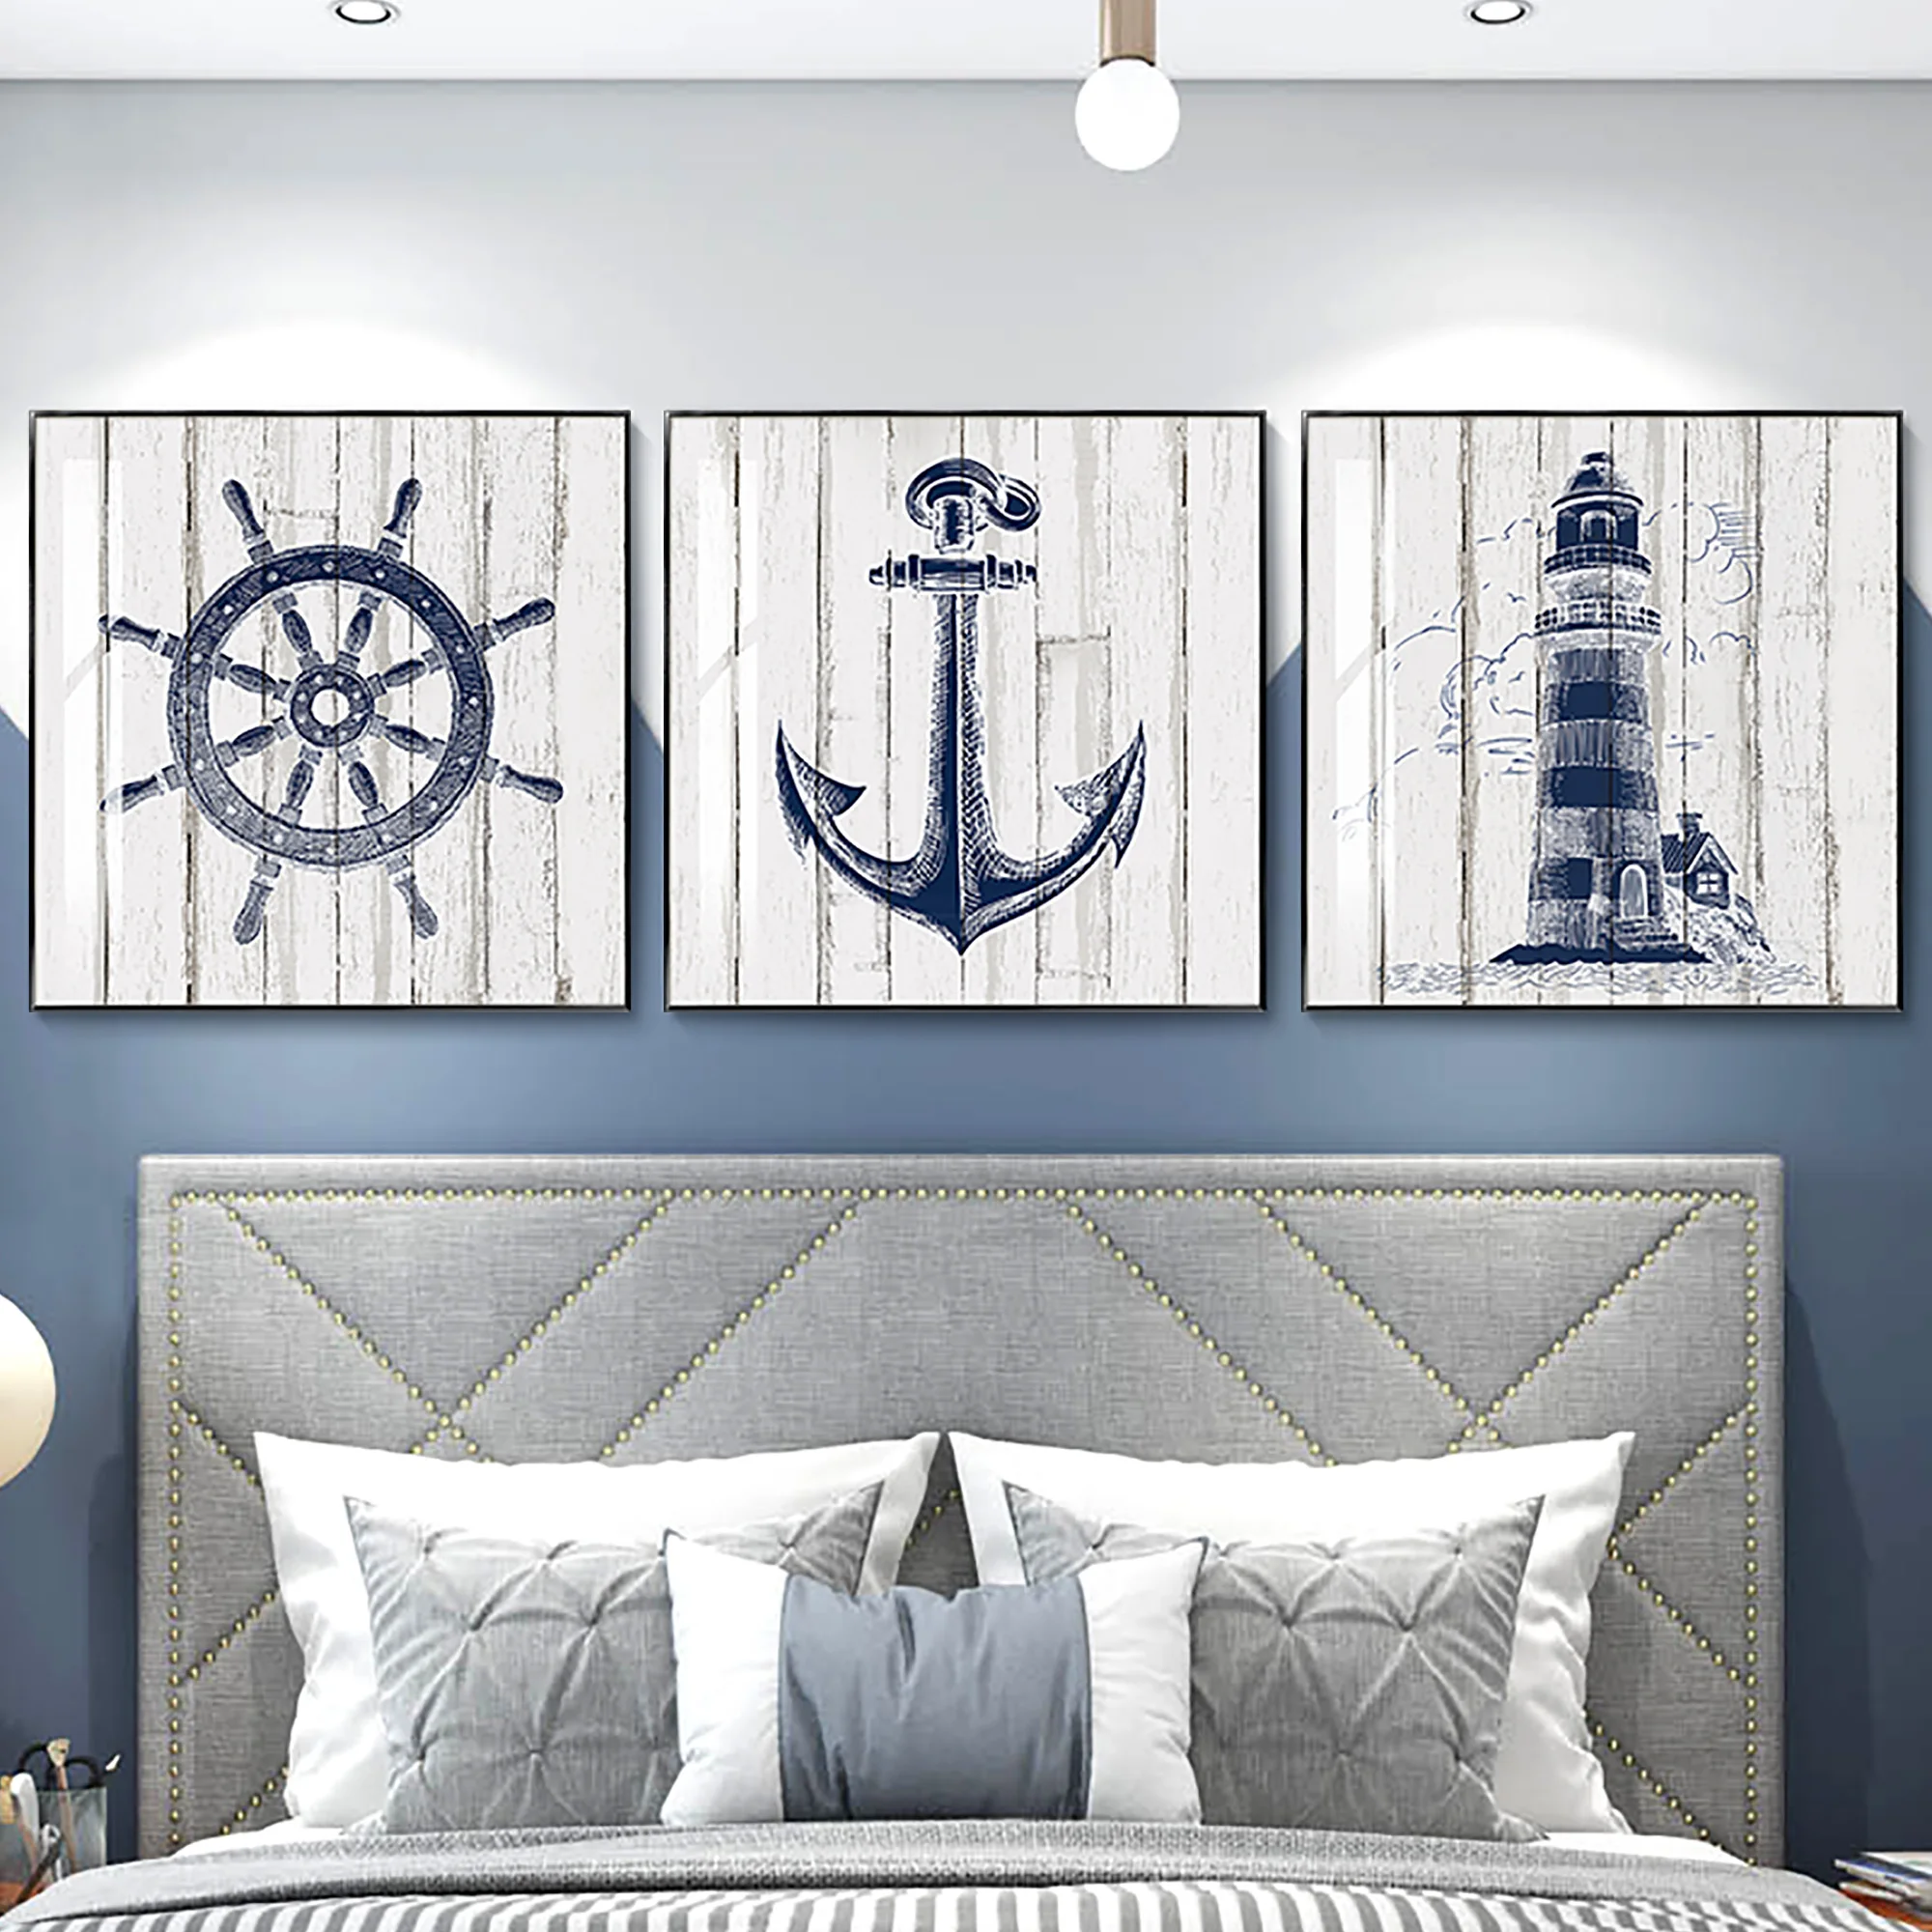 

Nautical Nursery Wall Art Canvas Painting Navy Pictures Anchor Compass Lighthouse Posters for Mediterranean Boy Room Home Decor